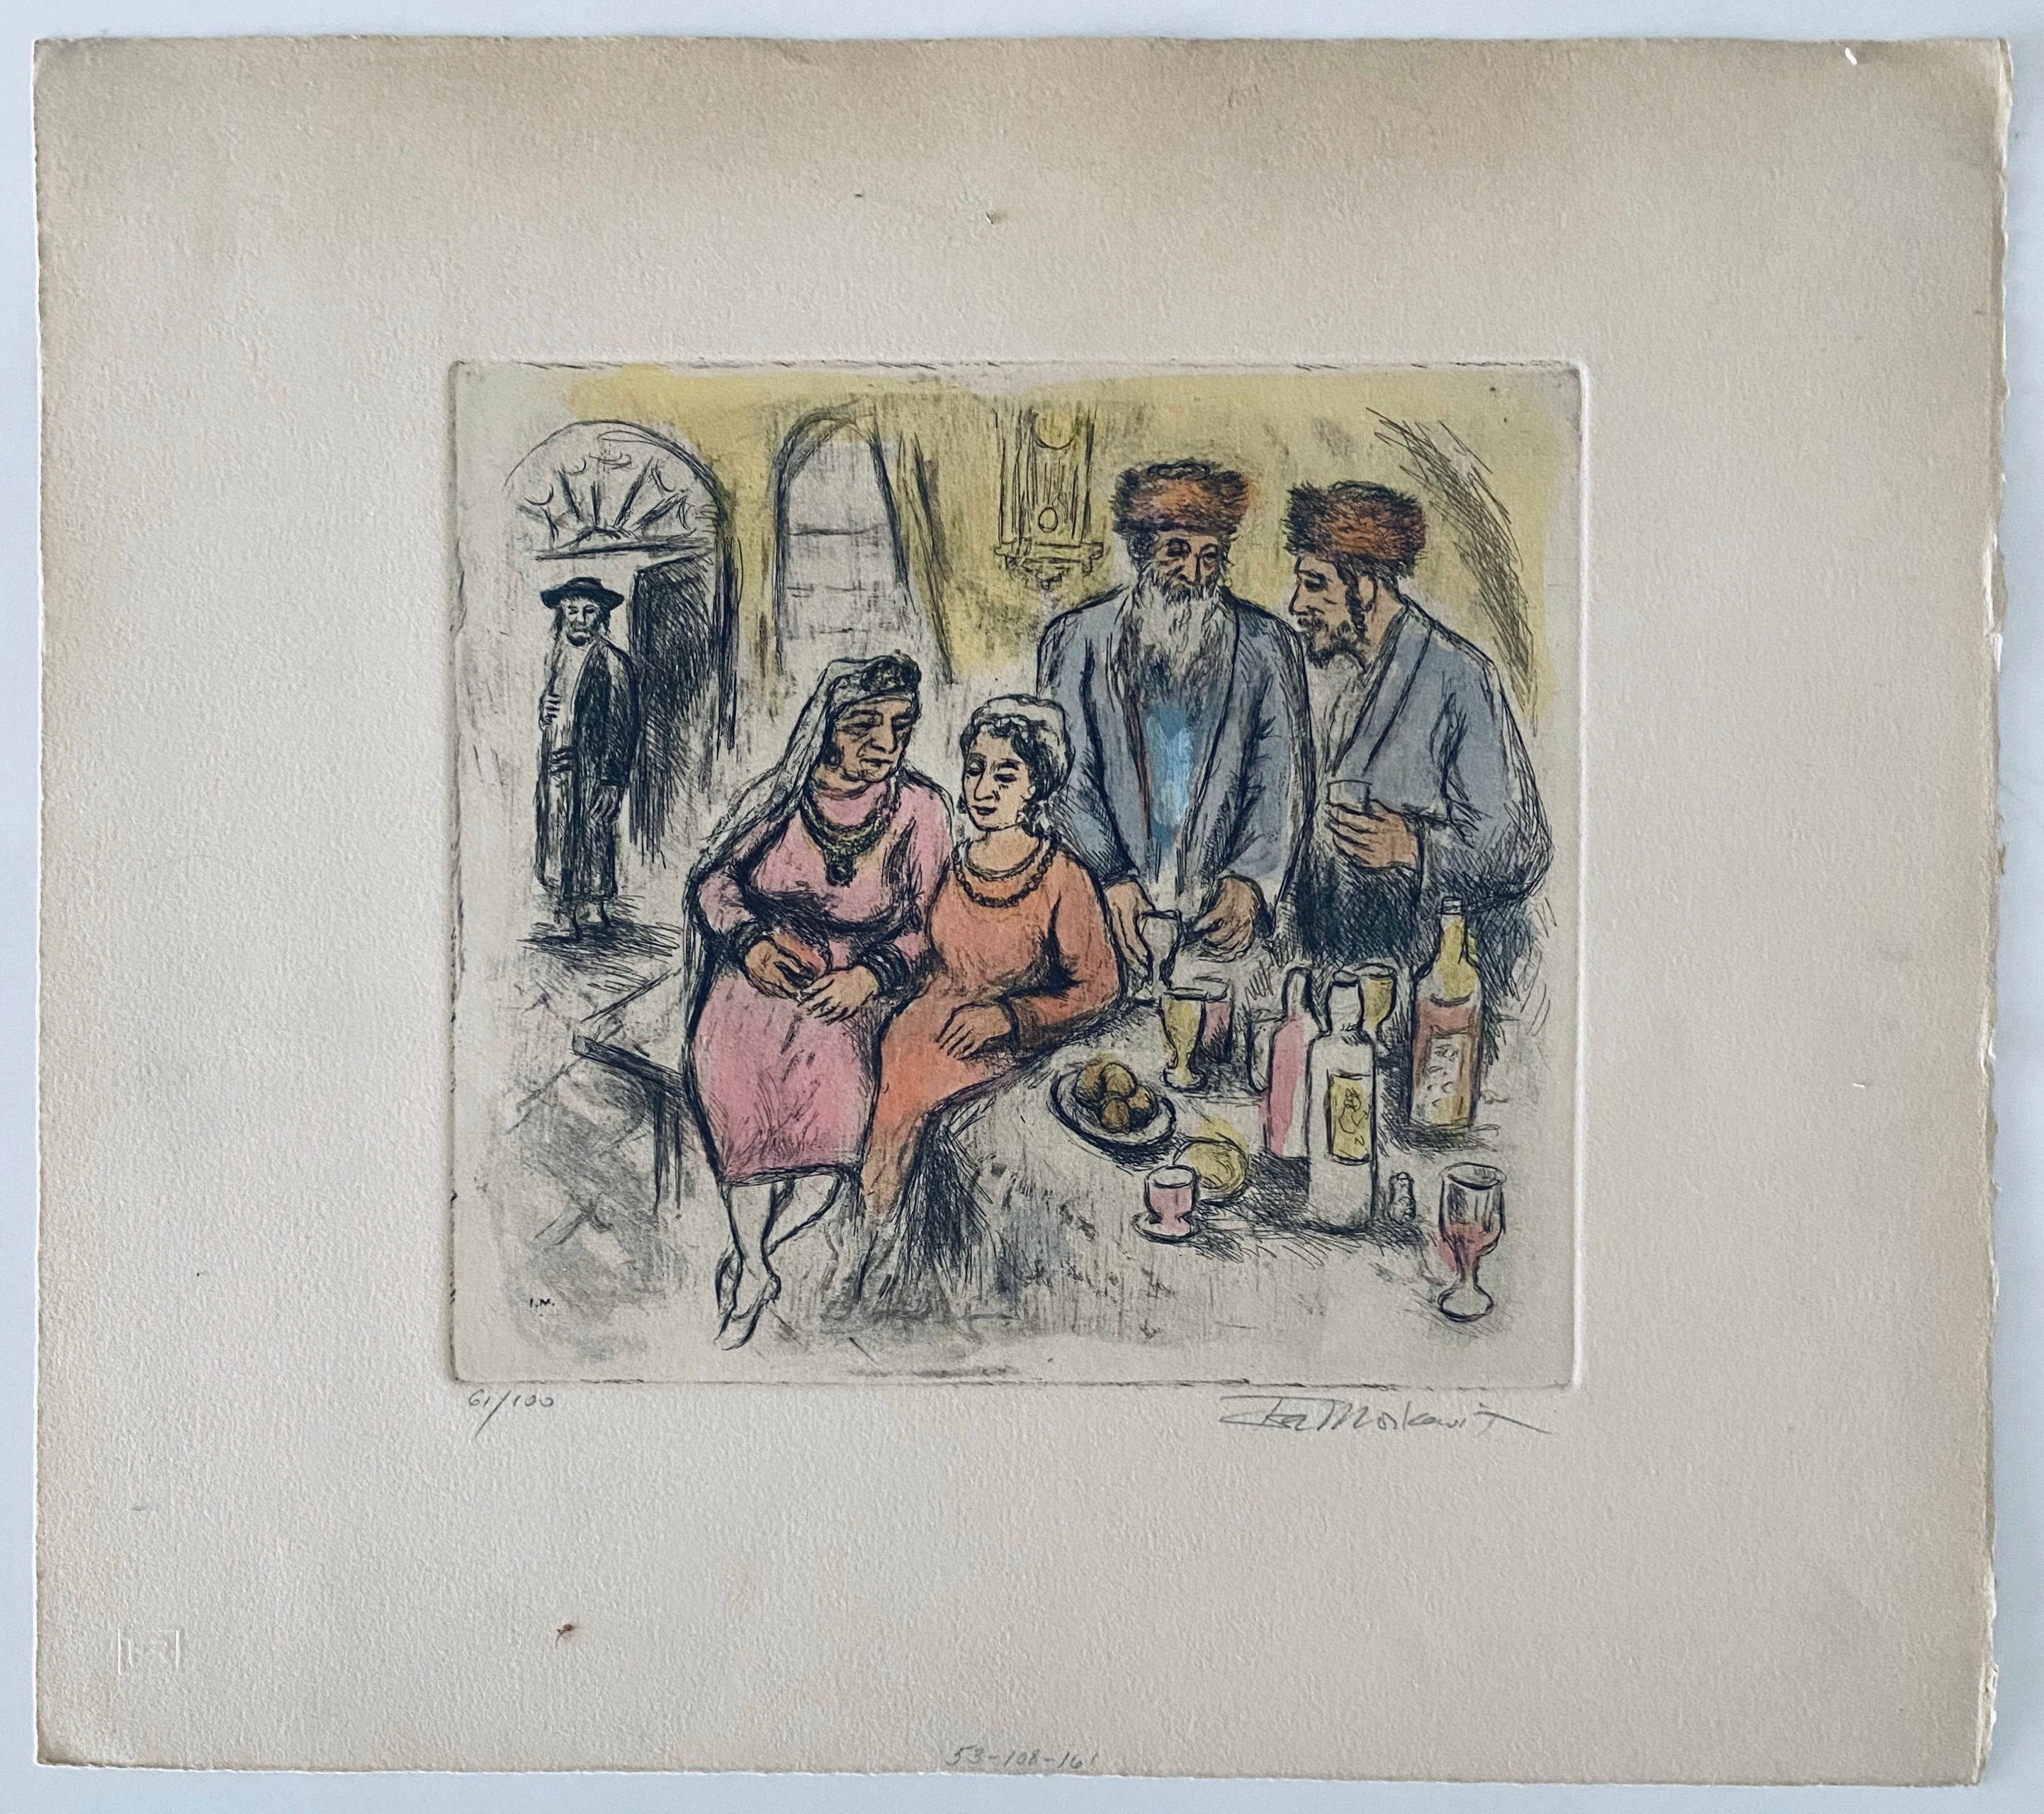 I believe the scene is of a wedding engagement. etching with extensive hand coloring (making it a unique original work of art) 
Ira Moskowitz (1912-2001), descendant of a long rabbinical line, was born in Galicia Poland and went with his family to